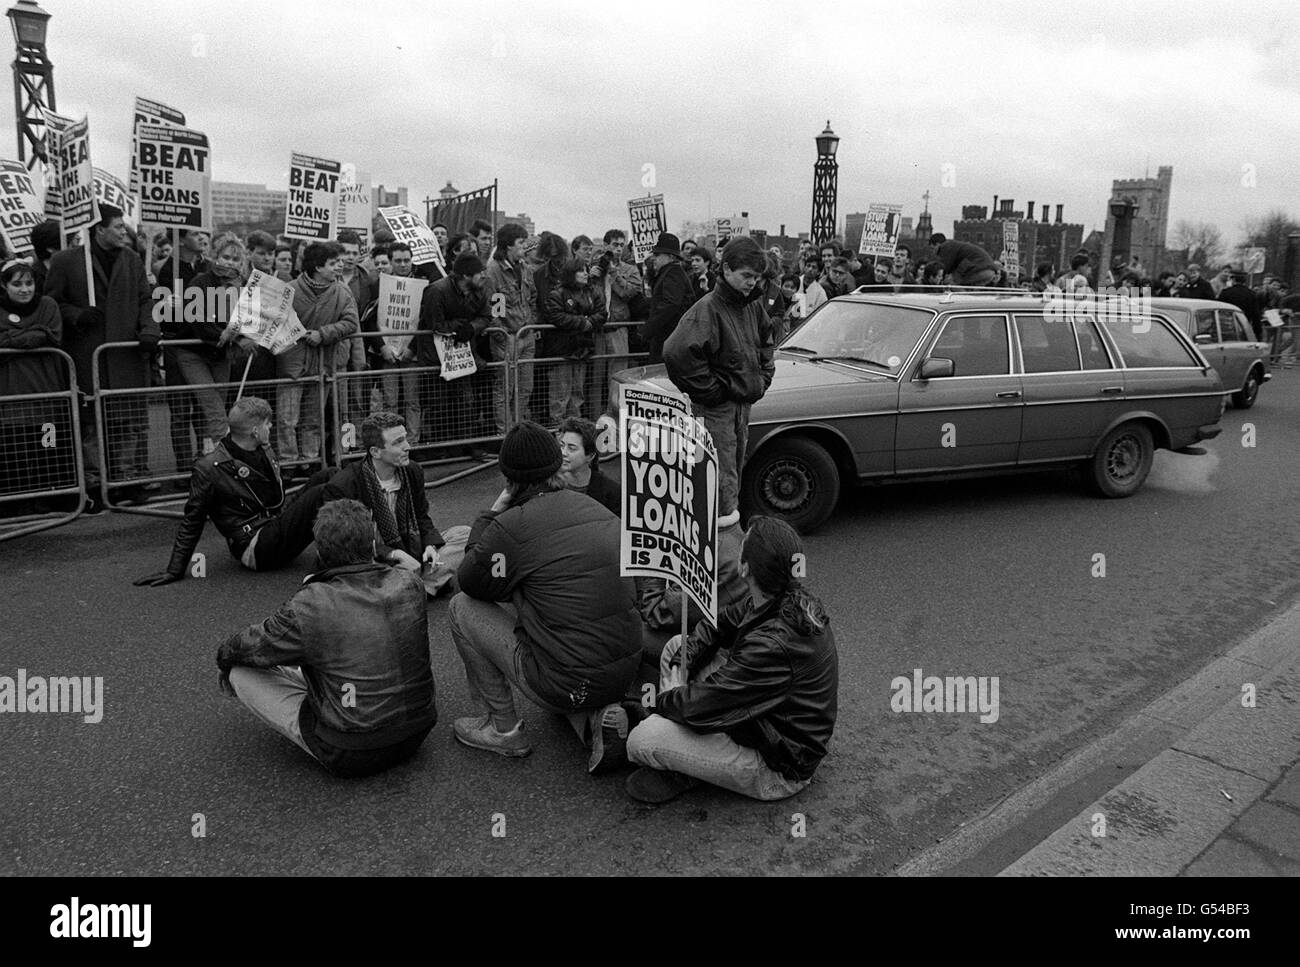 A group of stragglers stage a sit-down protest on Lambeth Bridge, London, during a march by students from all over the country demonstrating their opposition to Conservative Goverment plans for a top-up loan scheme to supplement grants. Stock Photo